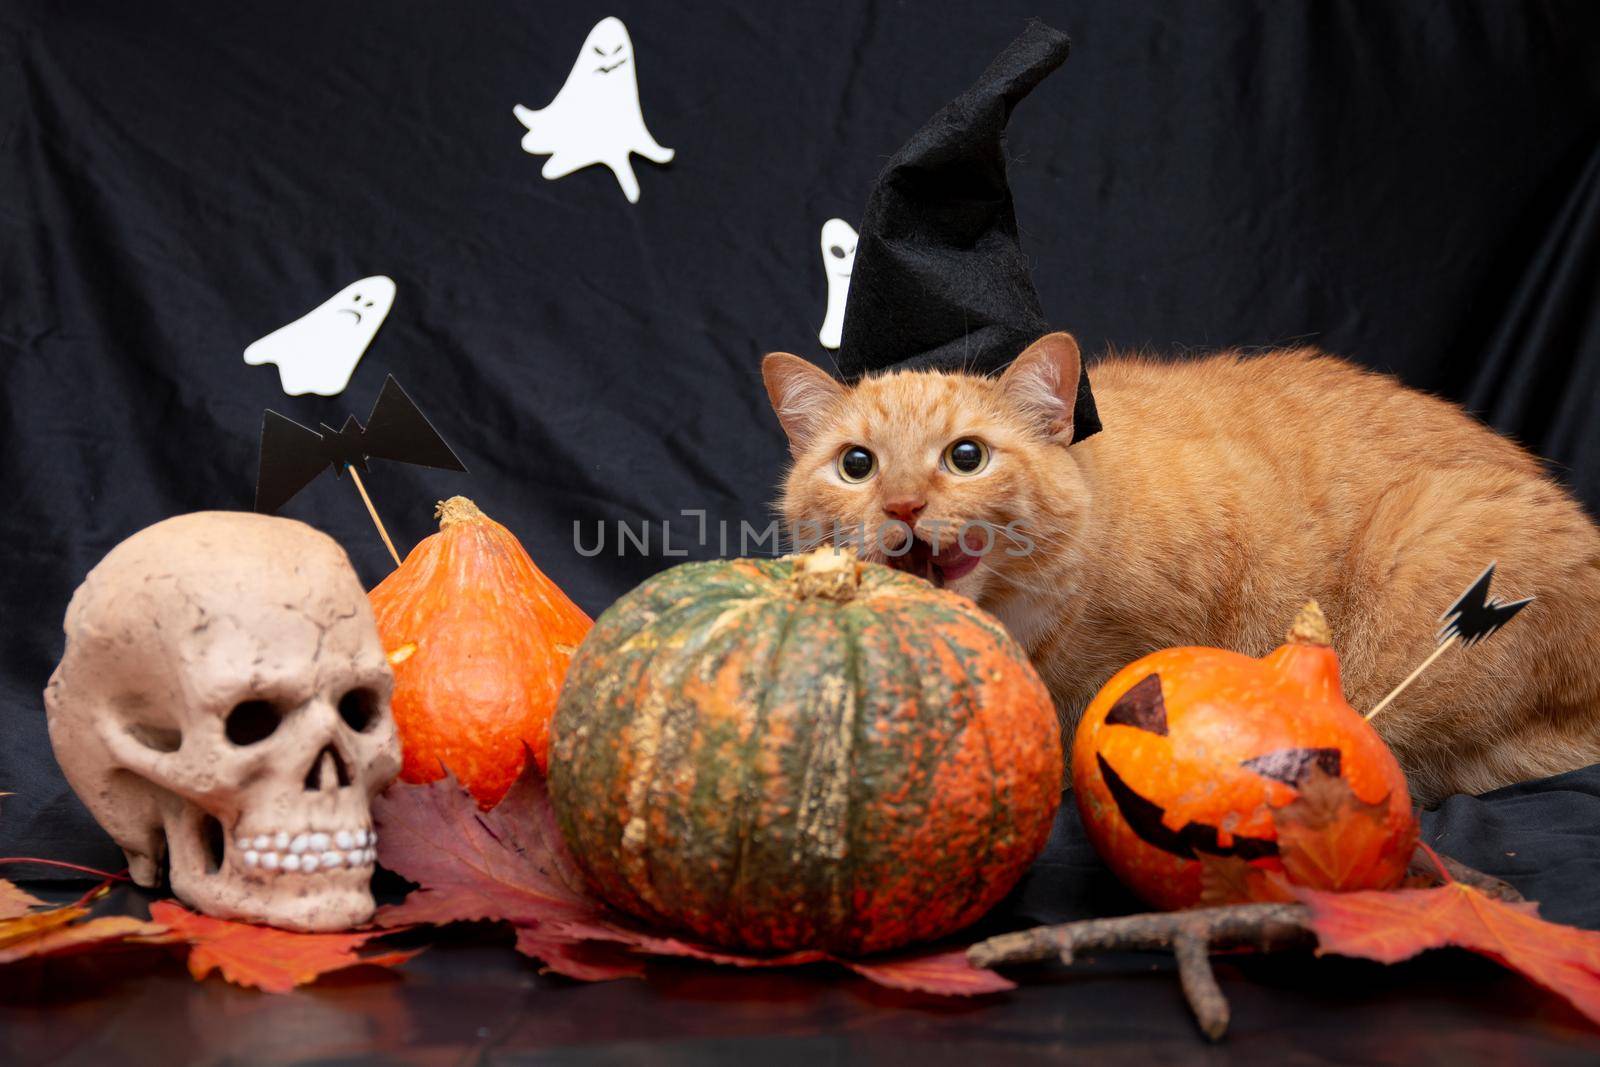 red cat open mouth in a black hat with halloween pumpkins and a skull on a dark background front view ghost on a background white black orange pumpkin auturm leaves on a floor